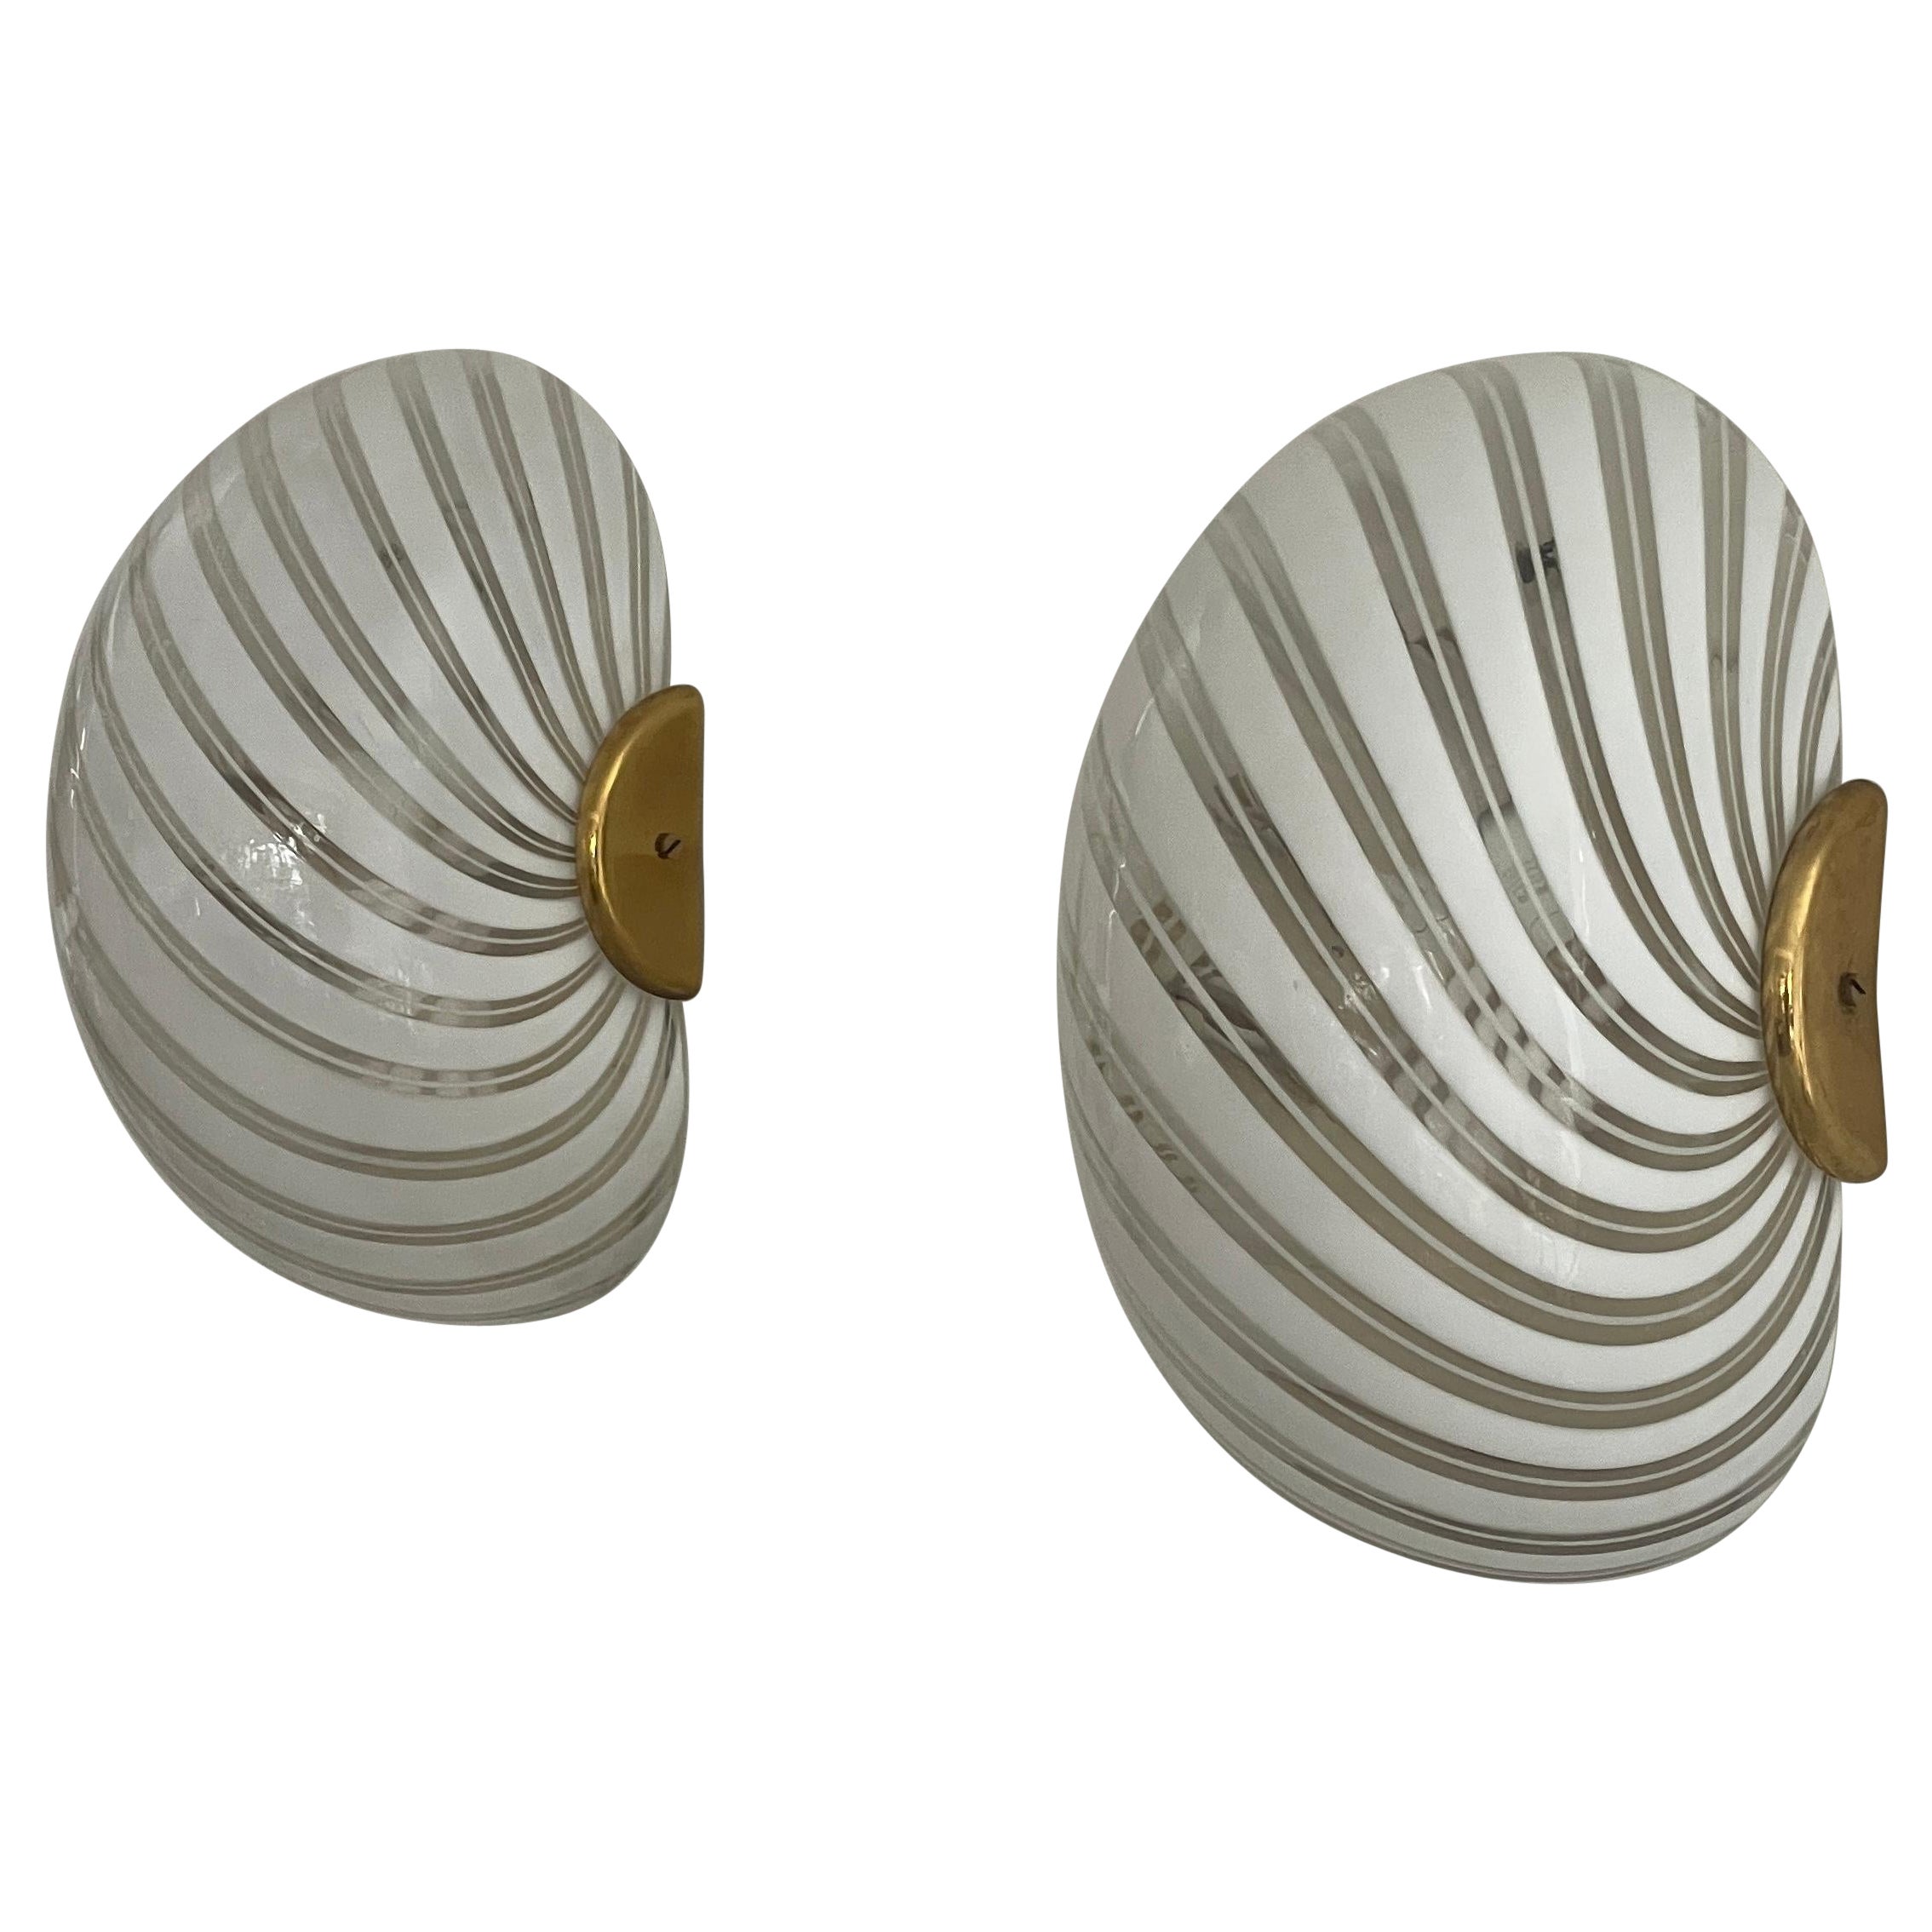 Swirl Pattern Murano Glass Pair of Sconces by F.Fabbian, 1970s, Italy